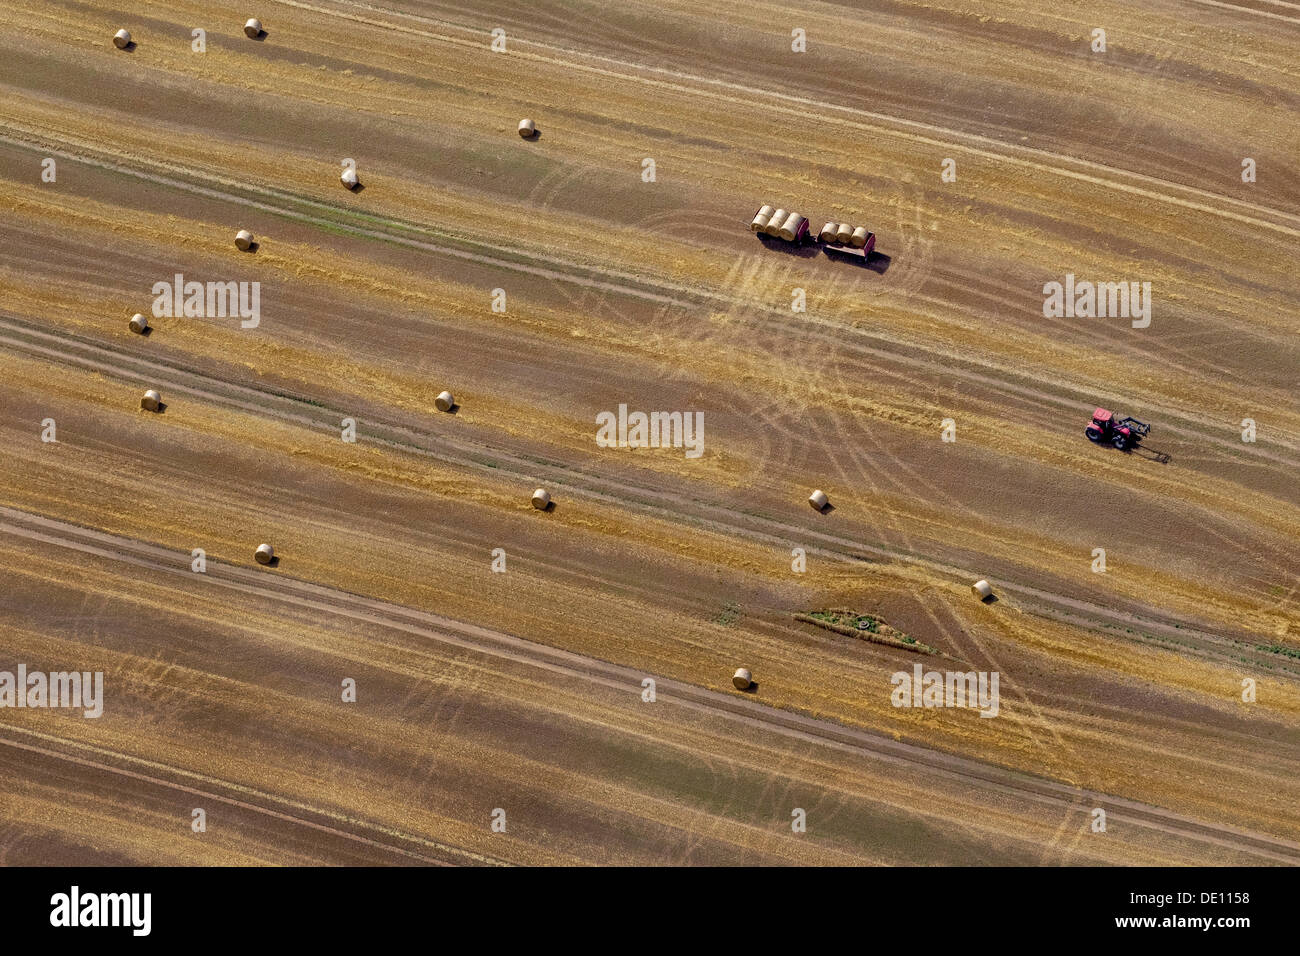 Aerial view, harvested corn field, tractor collecting straw bales, moraine Stock Photo